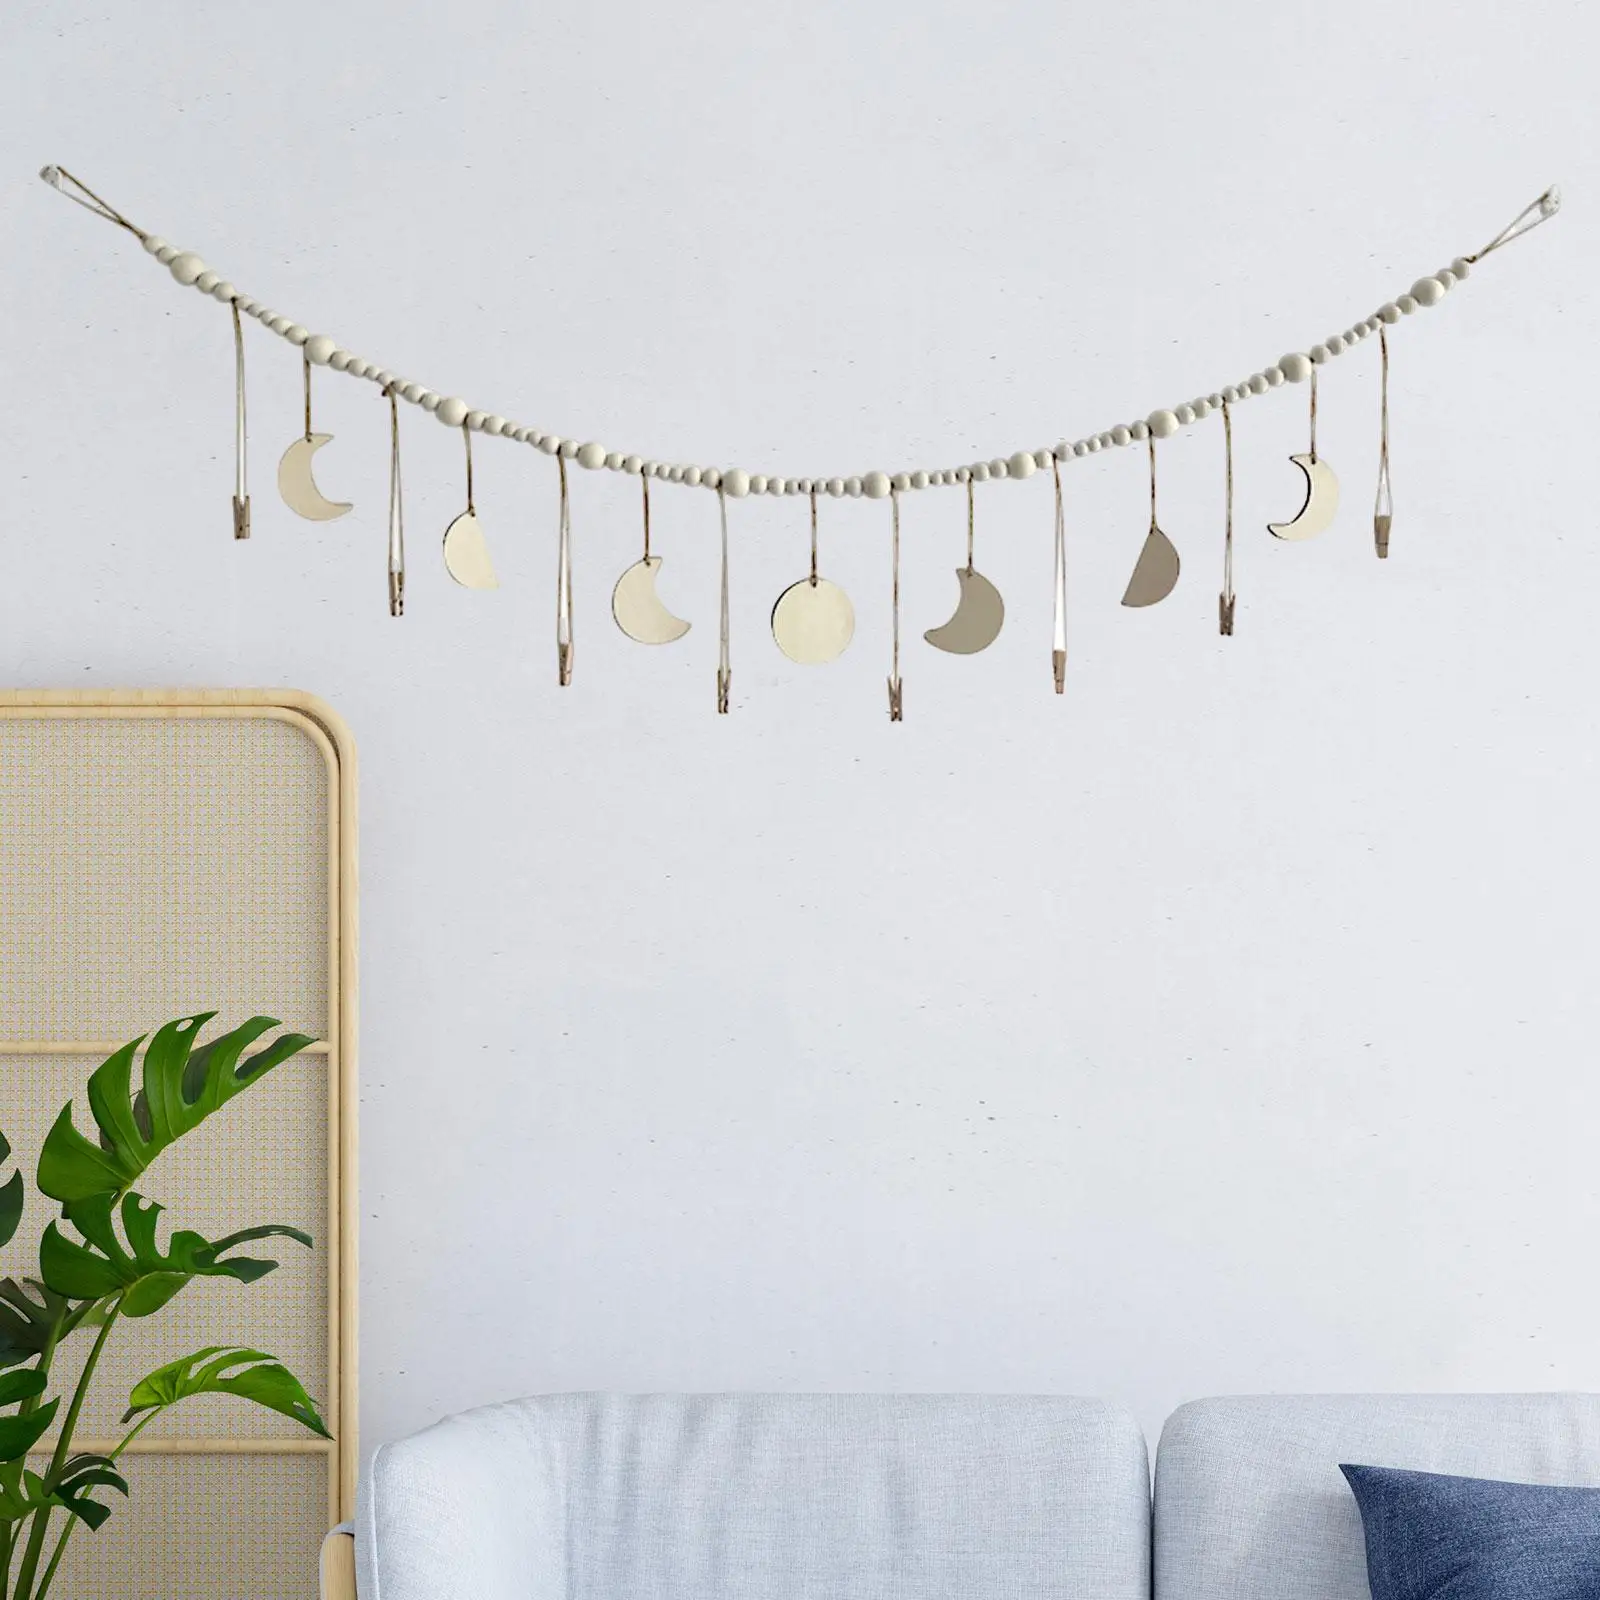 Wall Hanging Photo Display with Wood Bead Garland Wall Art Decor for Party Supplies Home Decoration